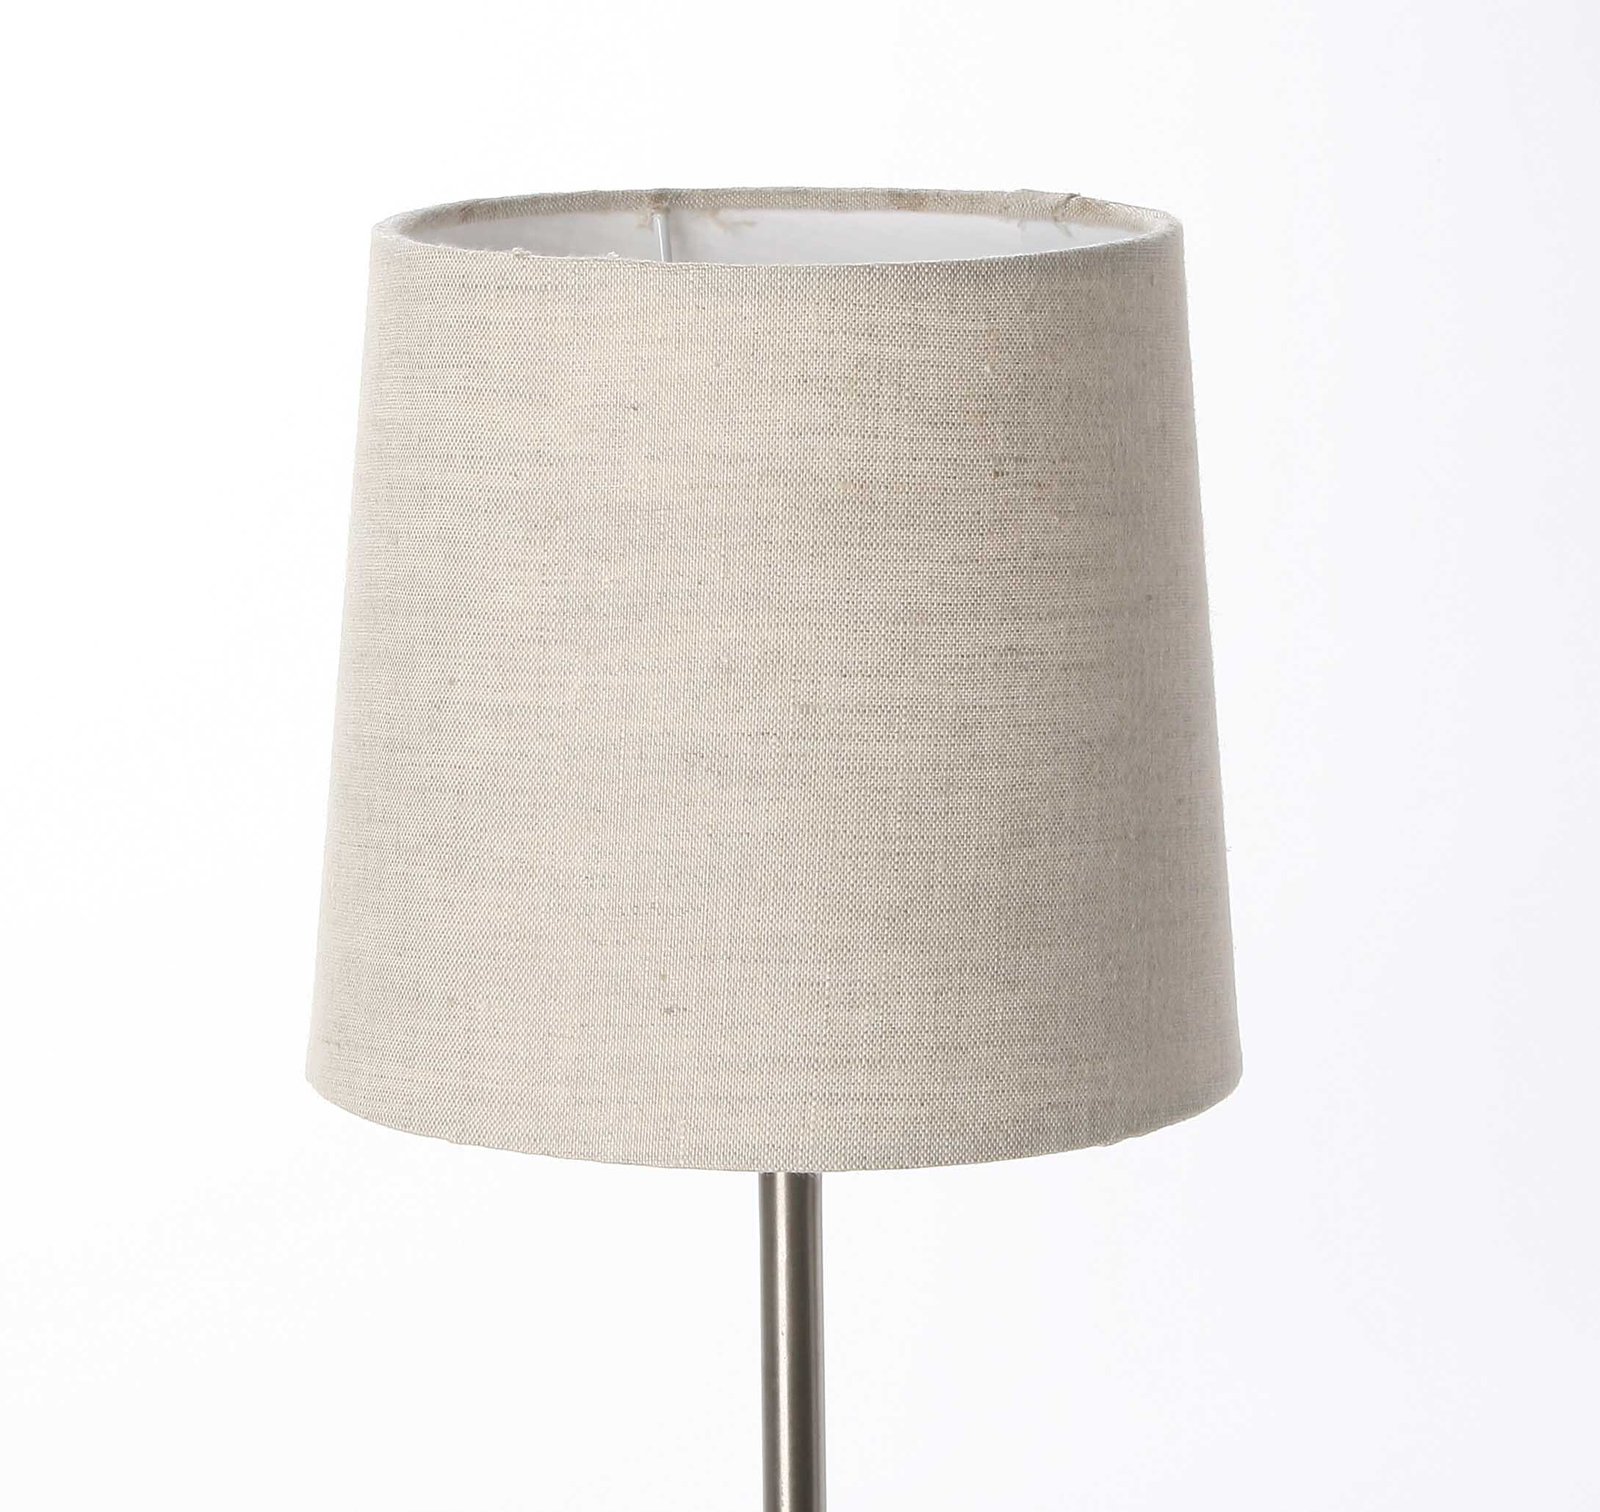 coolie fabric lamp shade in hard back style